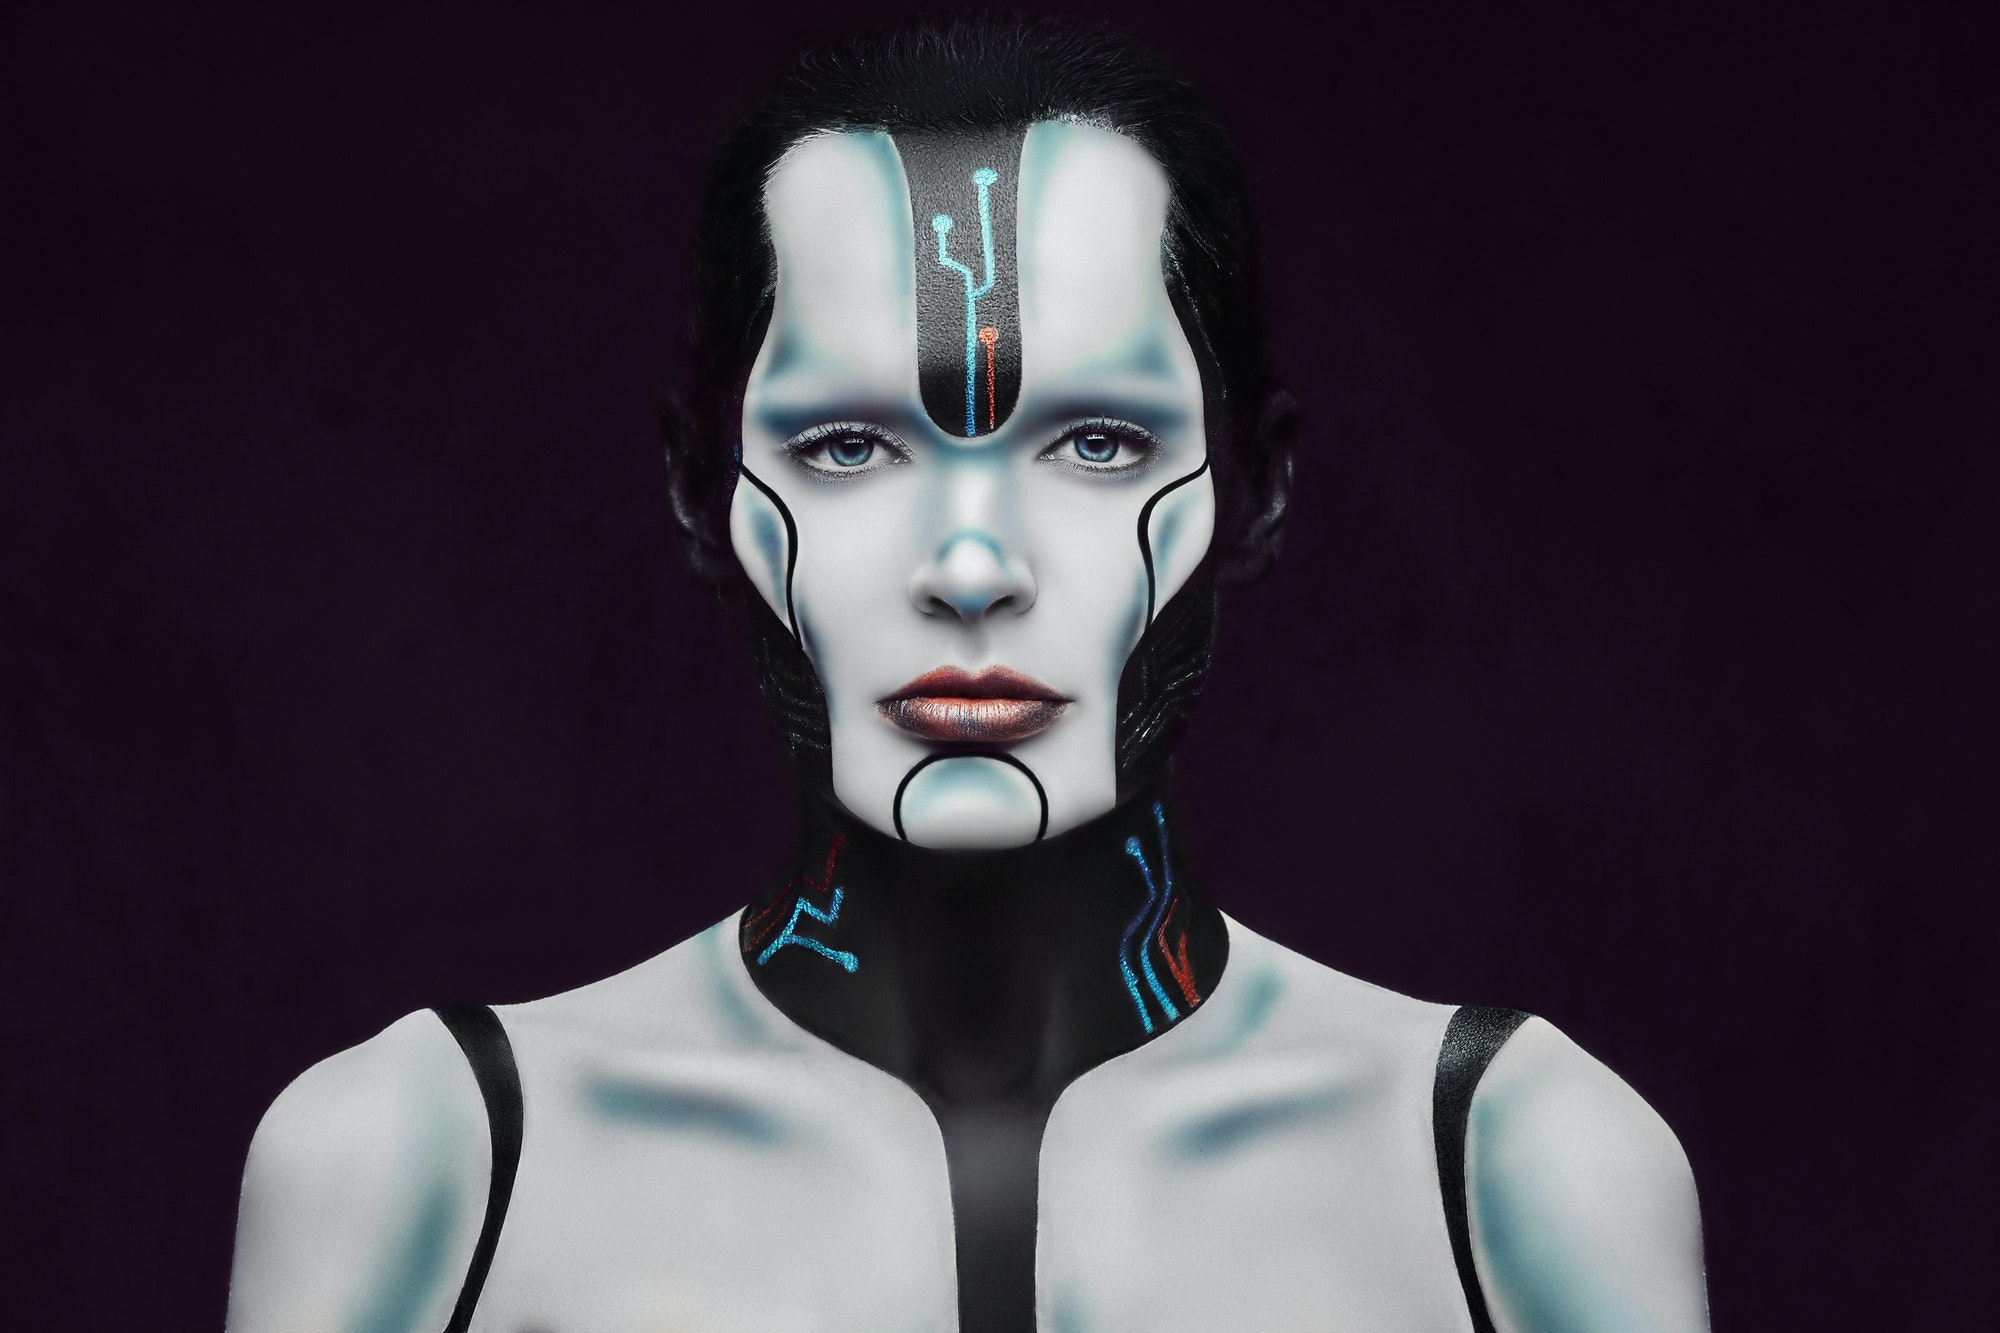 Sensual cyber woman. Technology and future concept. Isolated on a dark textured background.